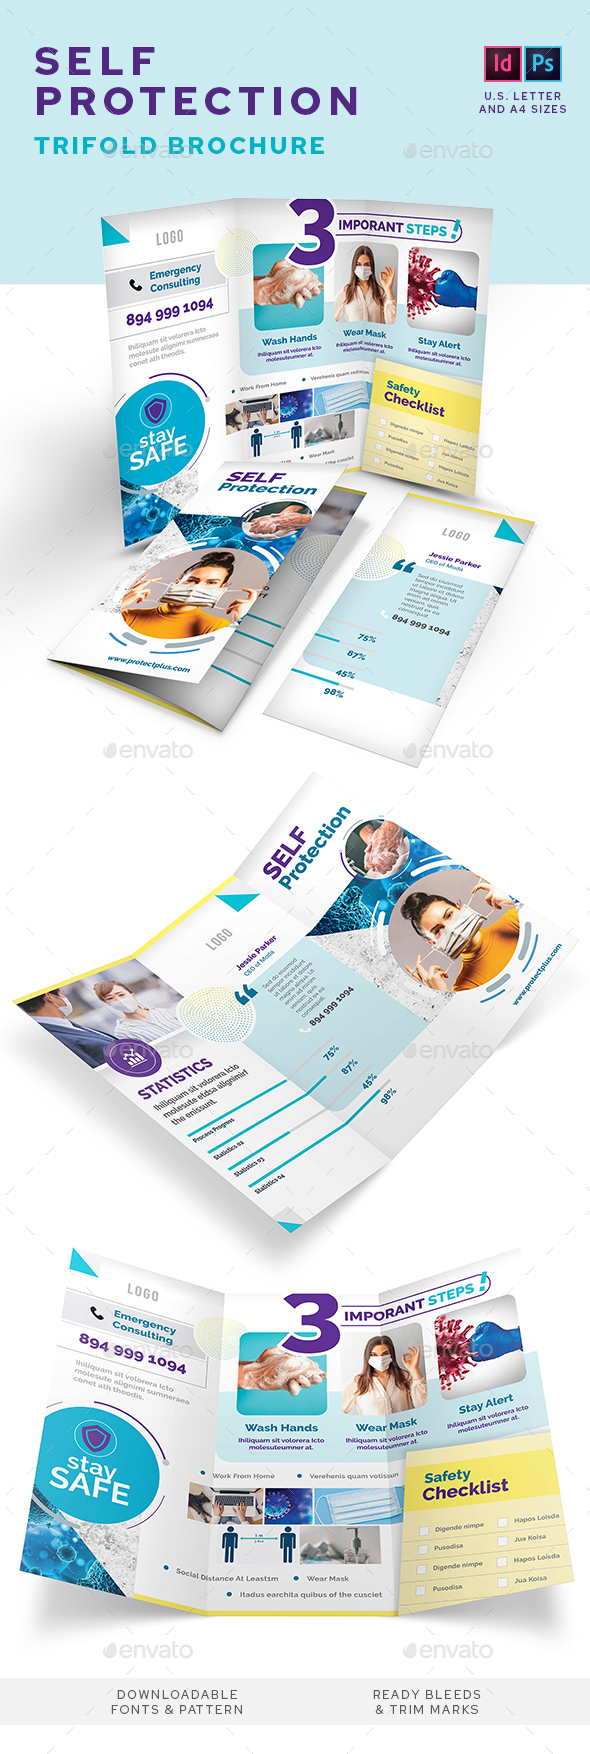 Self Protection Trifold Brochure